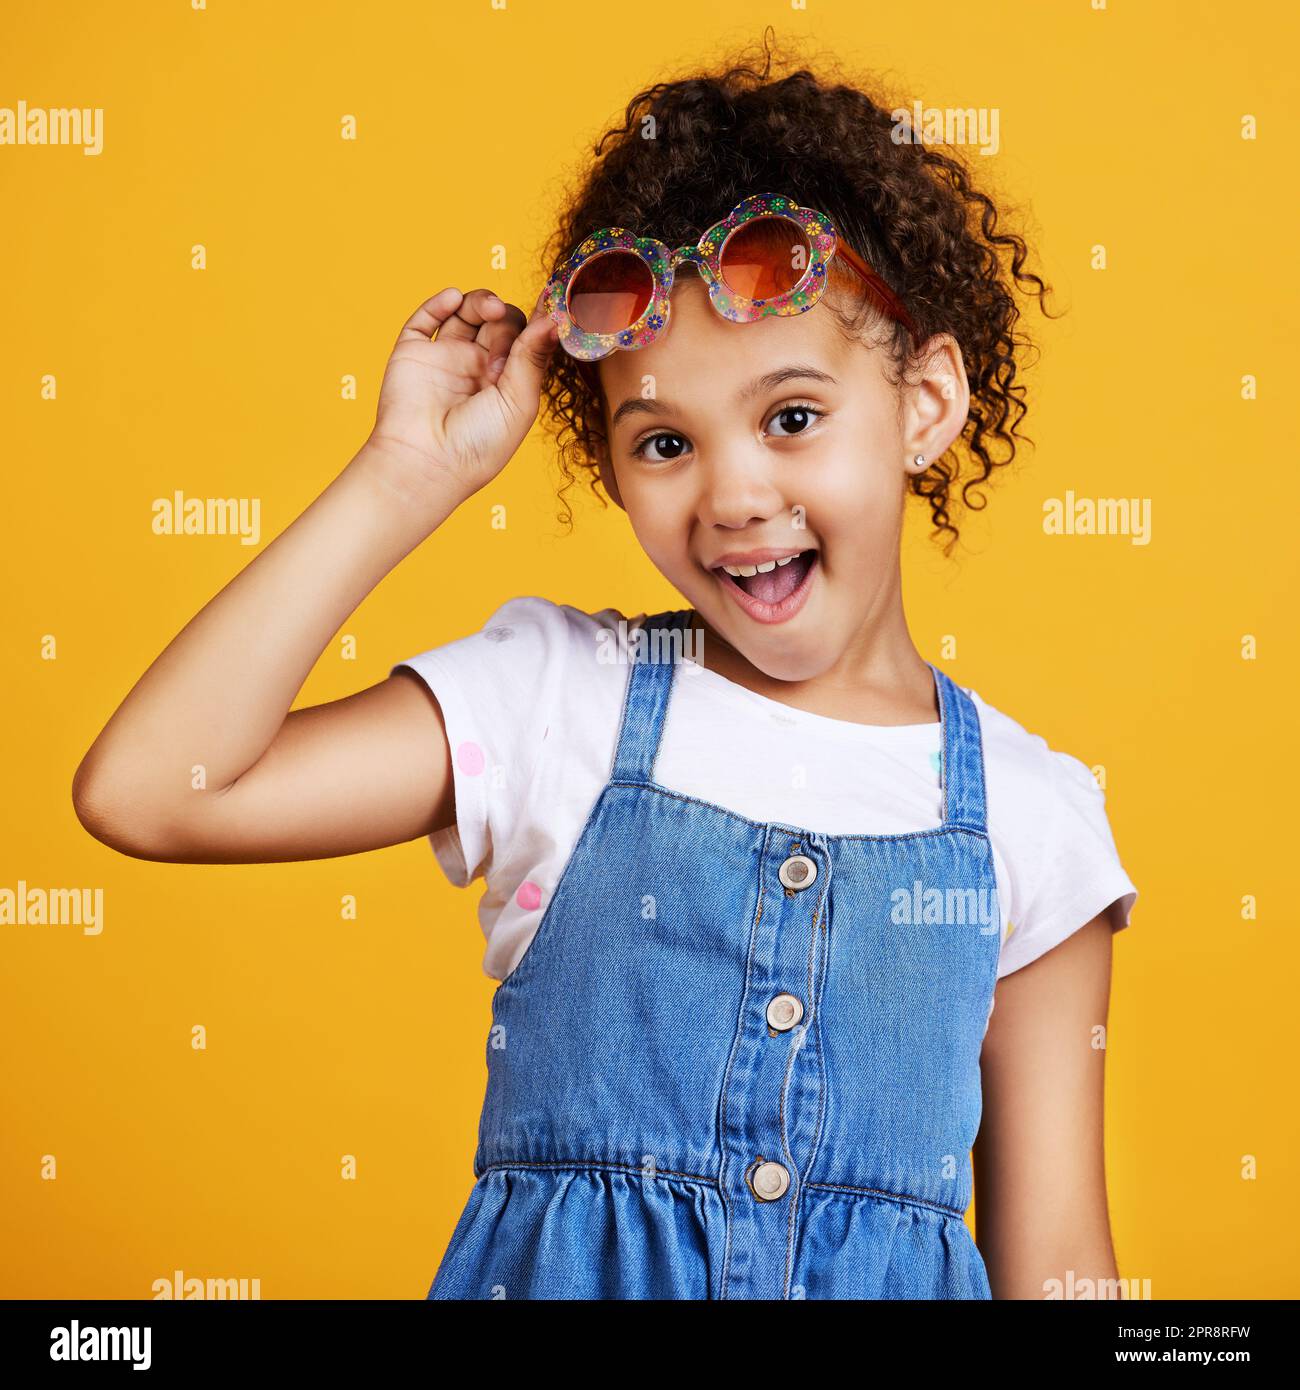 Studio portrait mixed race girl wearing funky sunglasses Isolated against a yellow background. Cute hispanic child posing inside. Happy and carefree kid with an imagination for being a fashion model Stock Photo